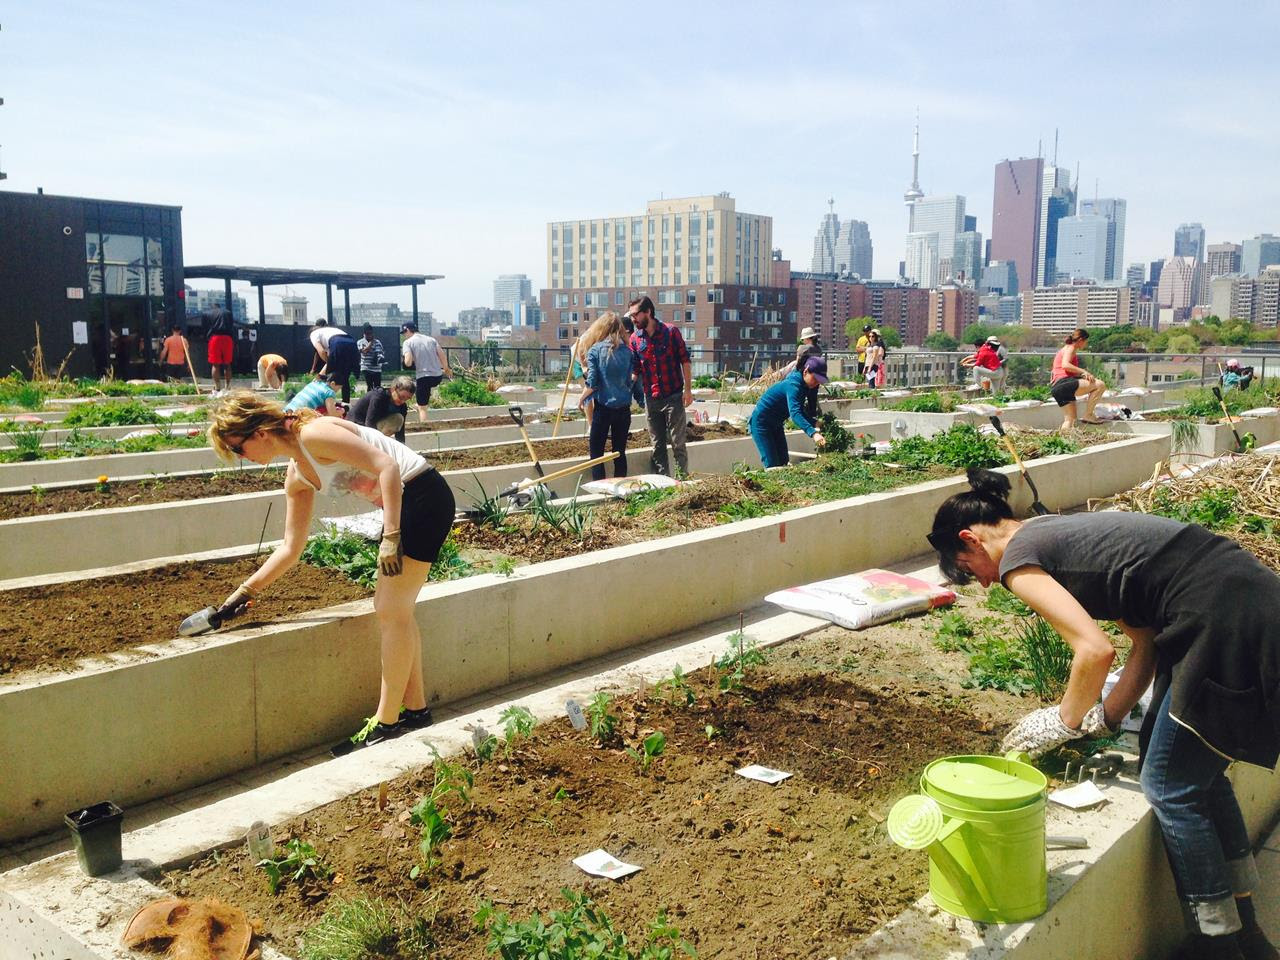 Curious About Urban Agriculture? Check out Urban Ag Week Sept 14-22!